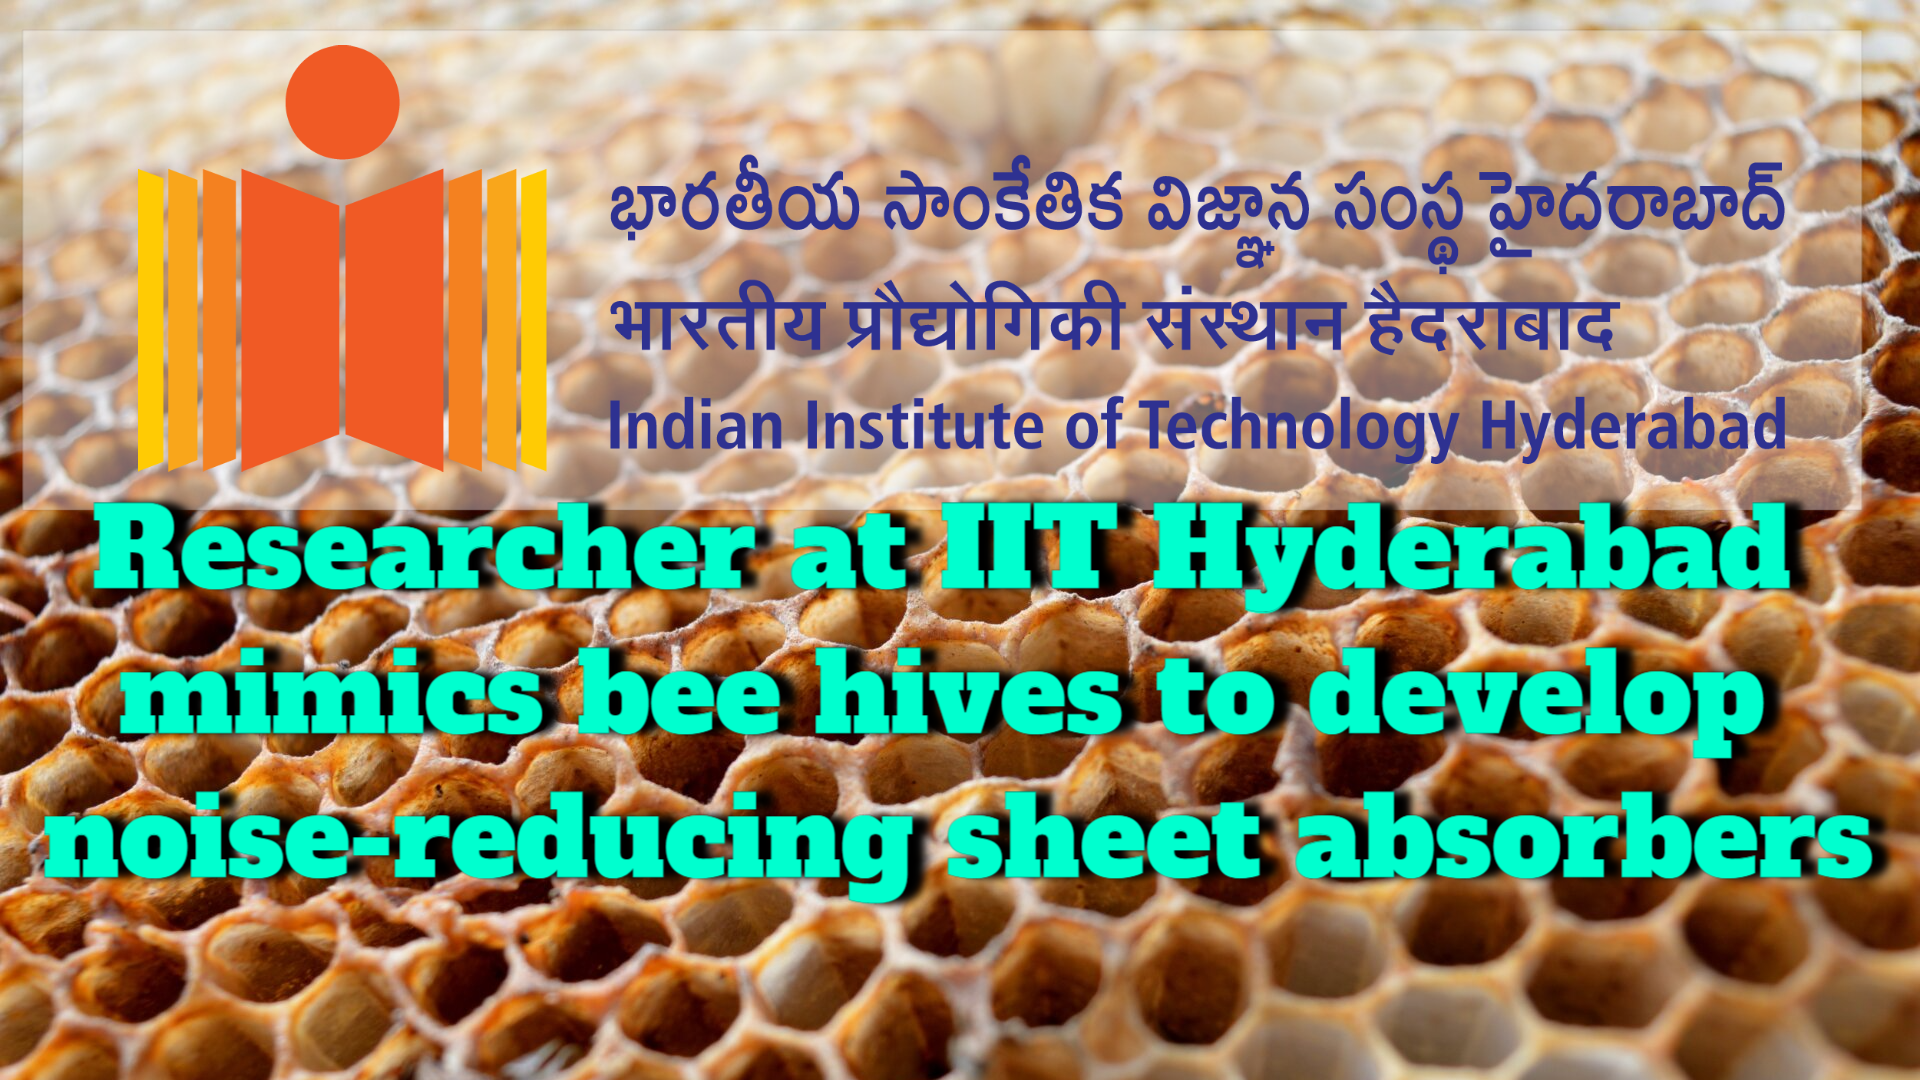 IIT Hyderabad researcher develops a noise-controlling sheet absorber by mimicking bee hives